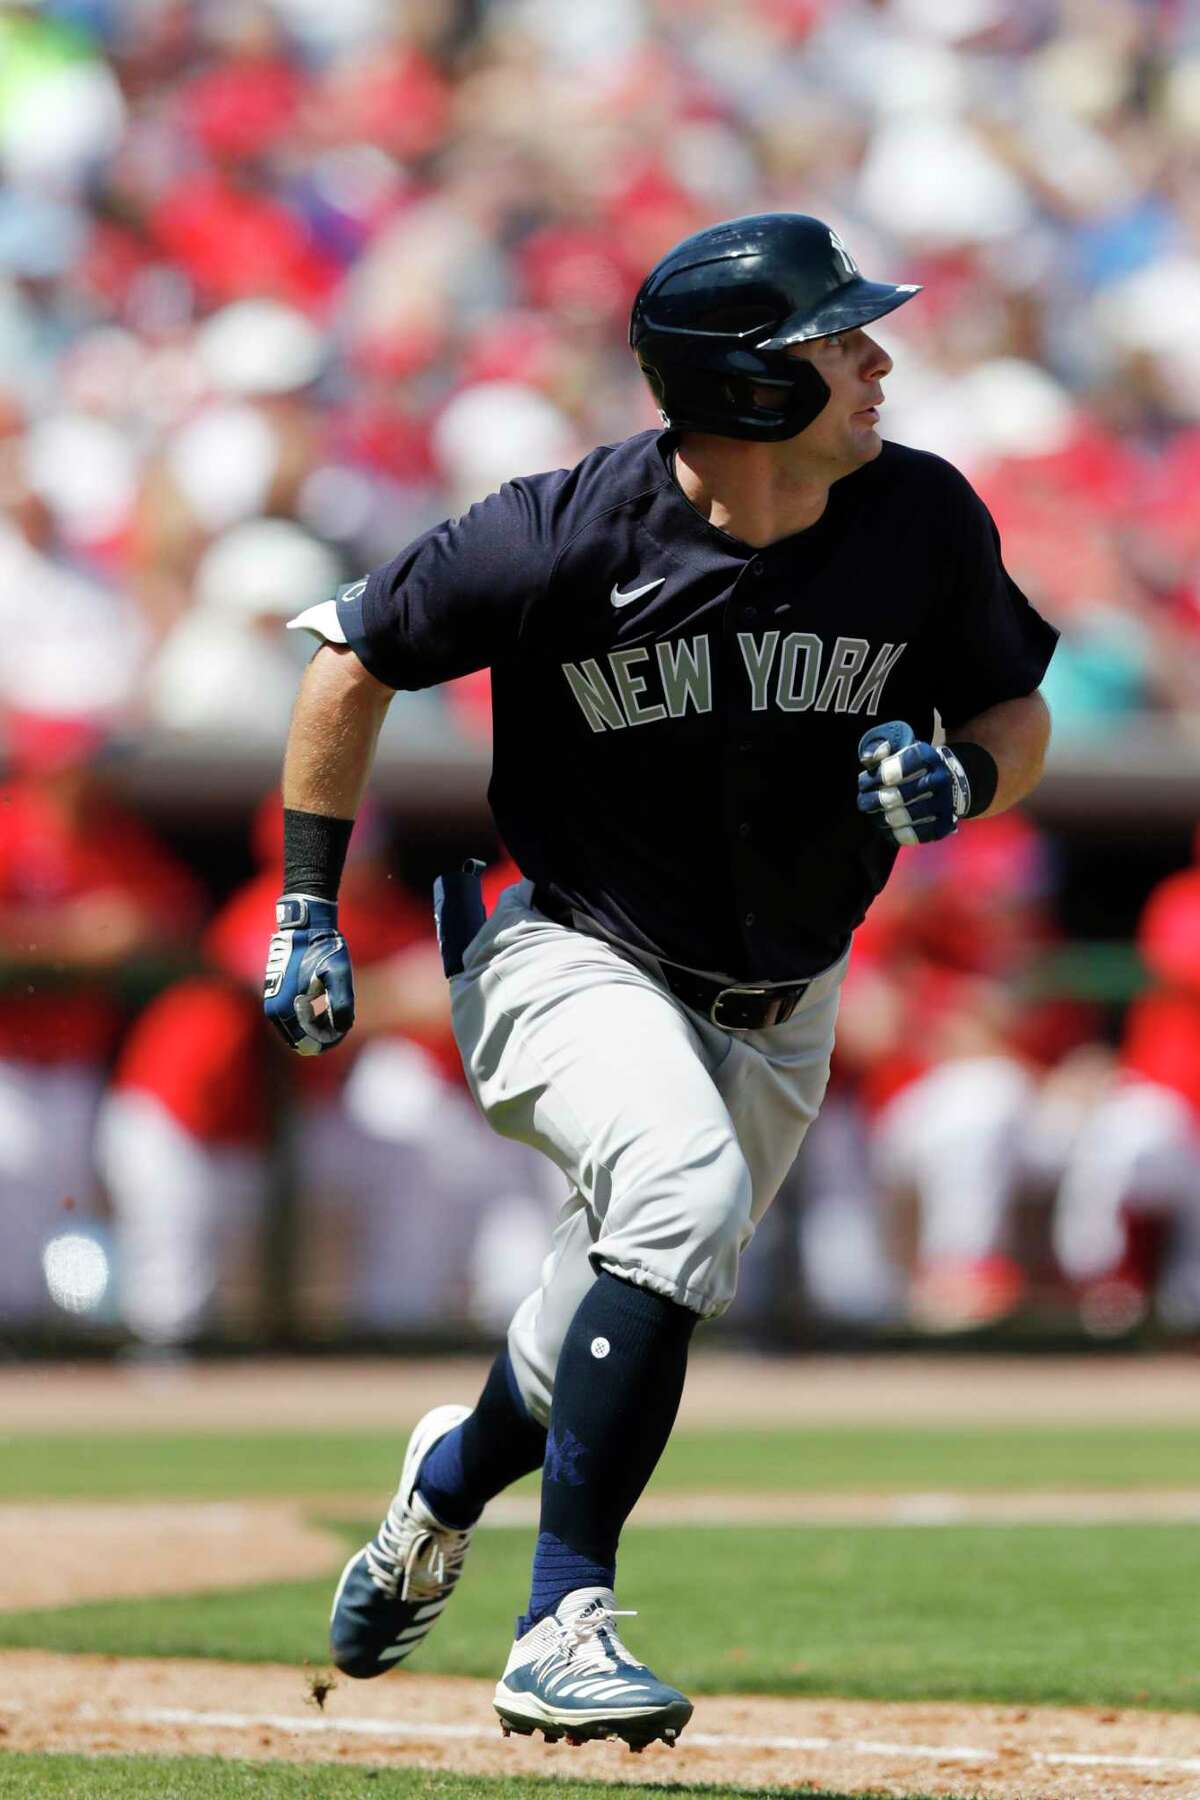 New York Yankees' Thomas Milone runs to first during a spring training baseball game, Monday, March 9, 2020, in Clearwater, Fla. (AP Photo/Carlos Osorio)